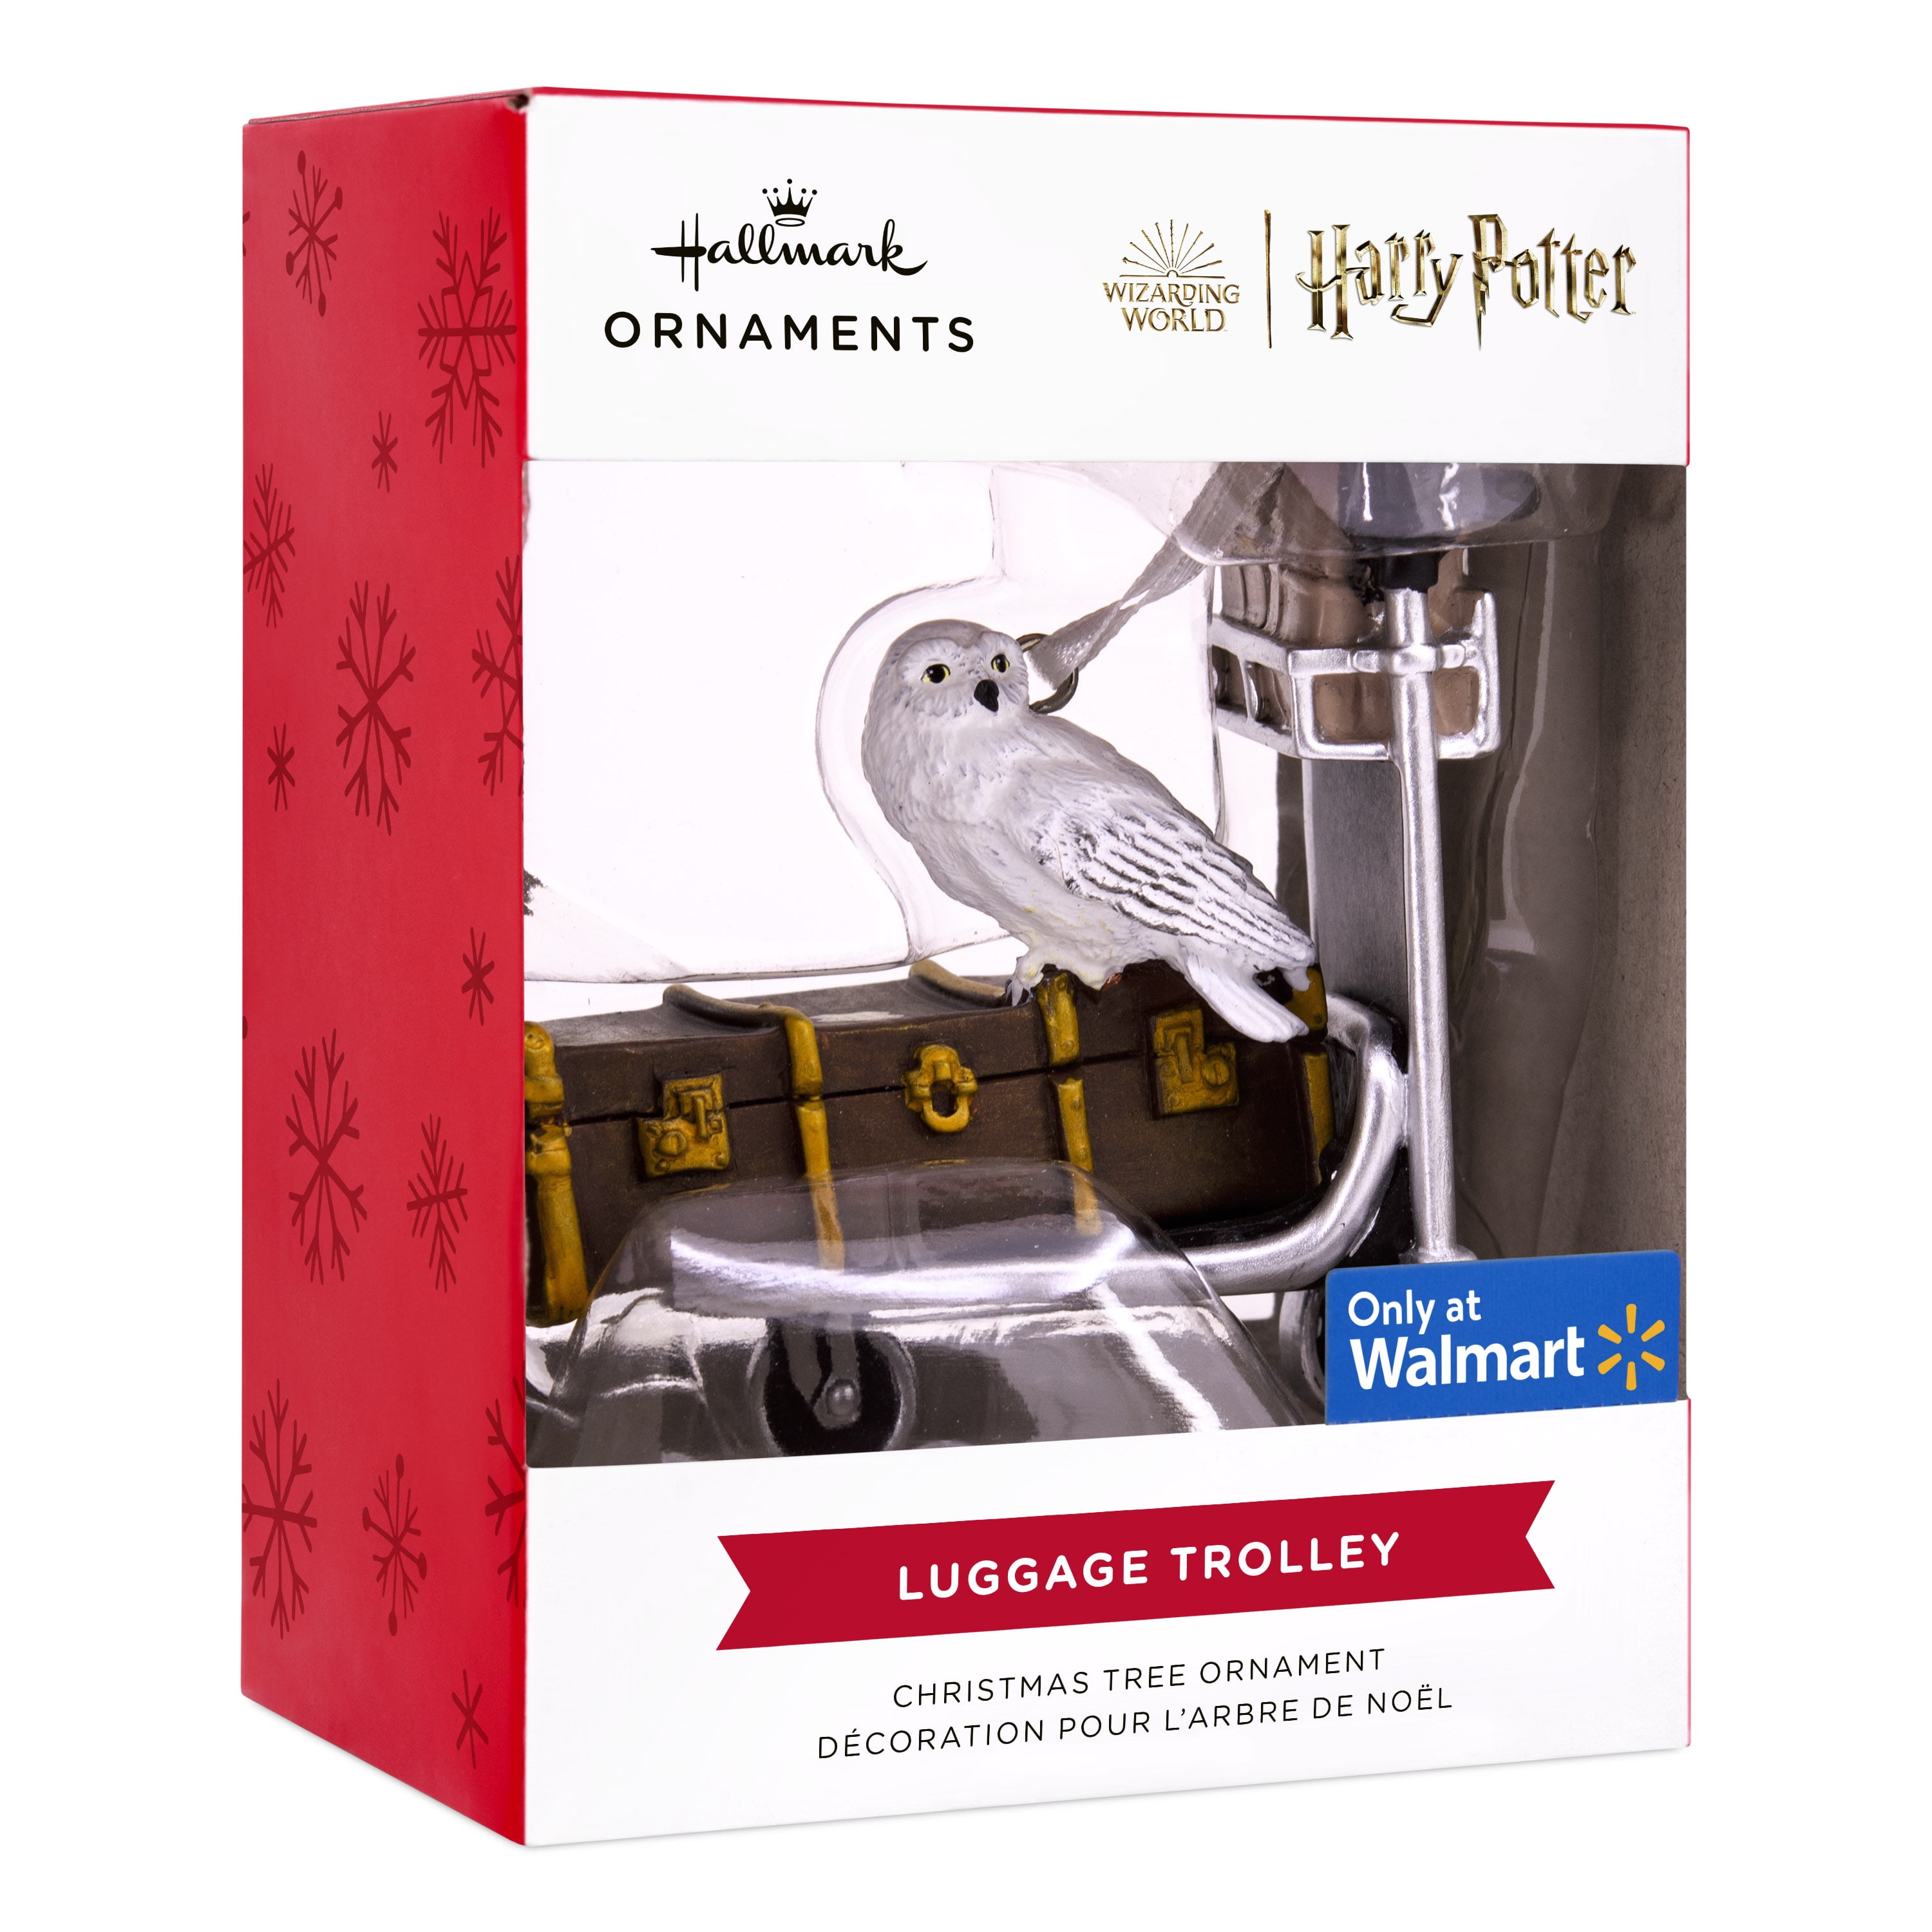 Harry potter ornaments • Compare & see prices now »